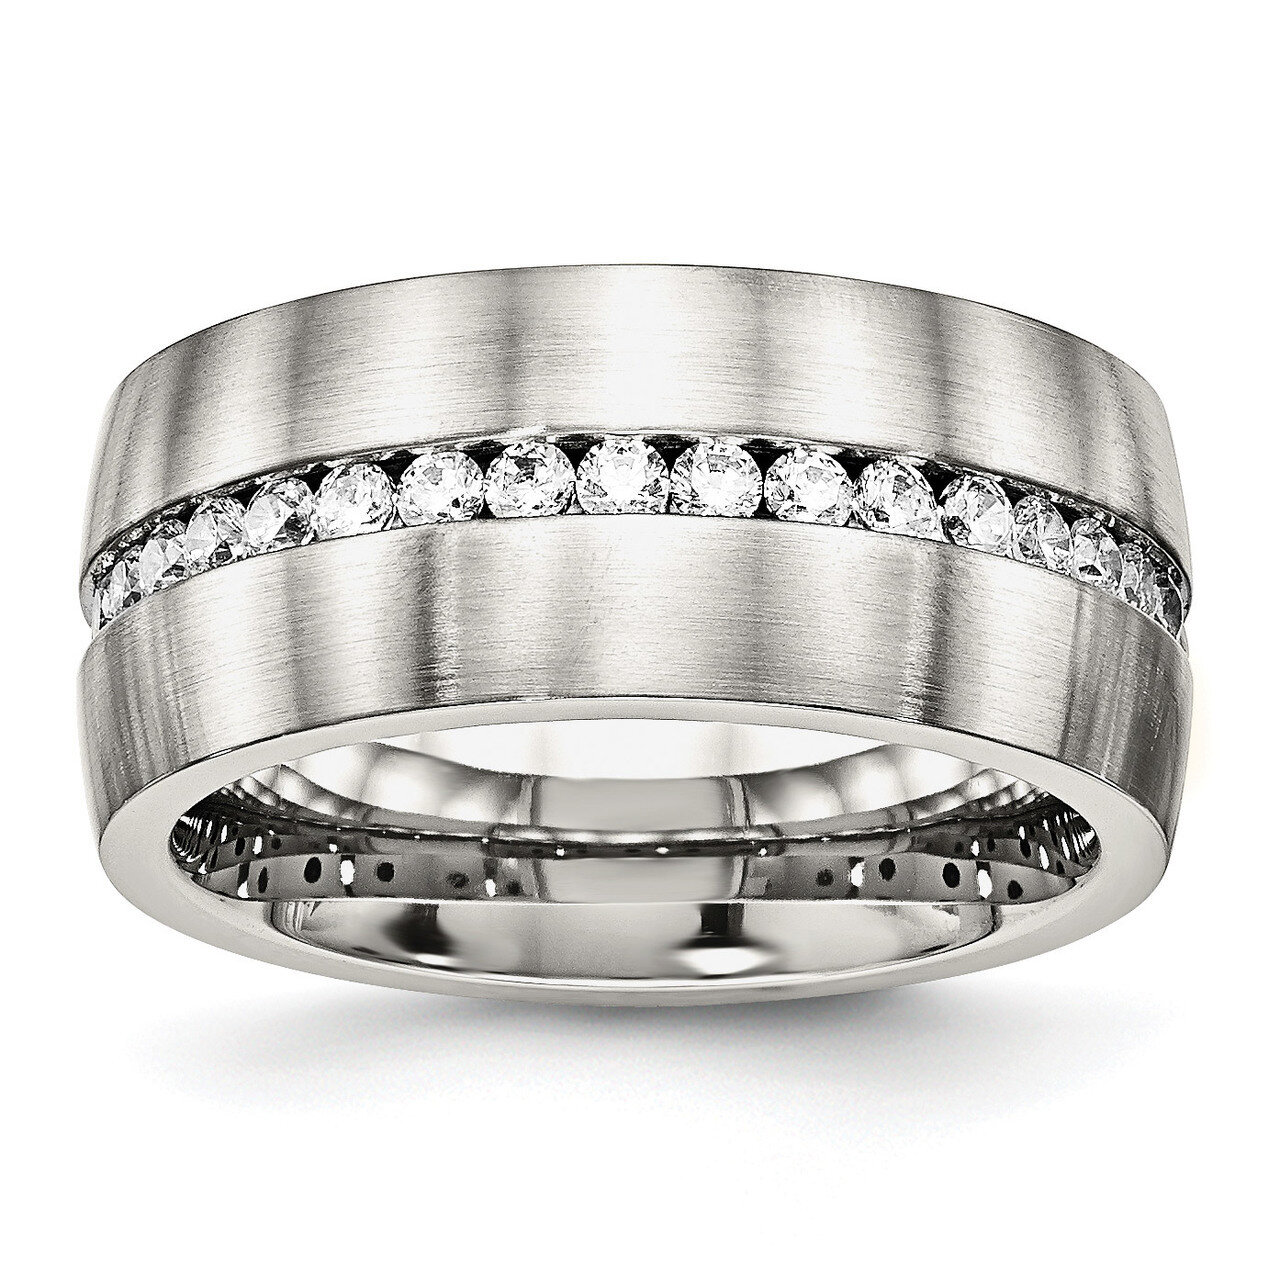 Diamond CZ Ring Stainless Steel Brushed and Polished SR573